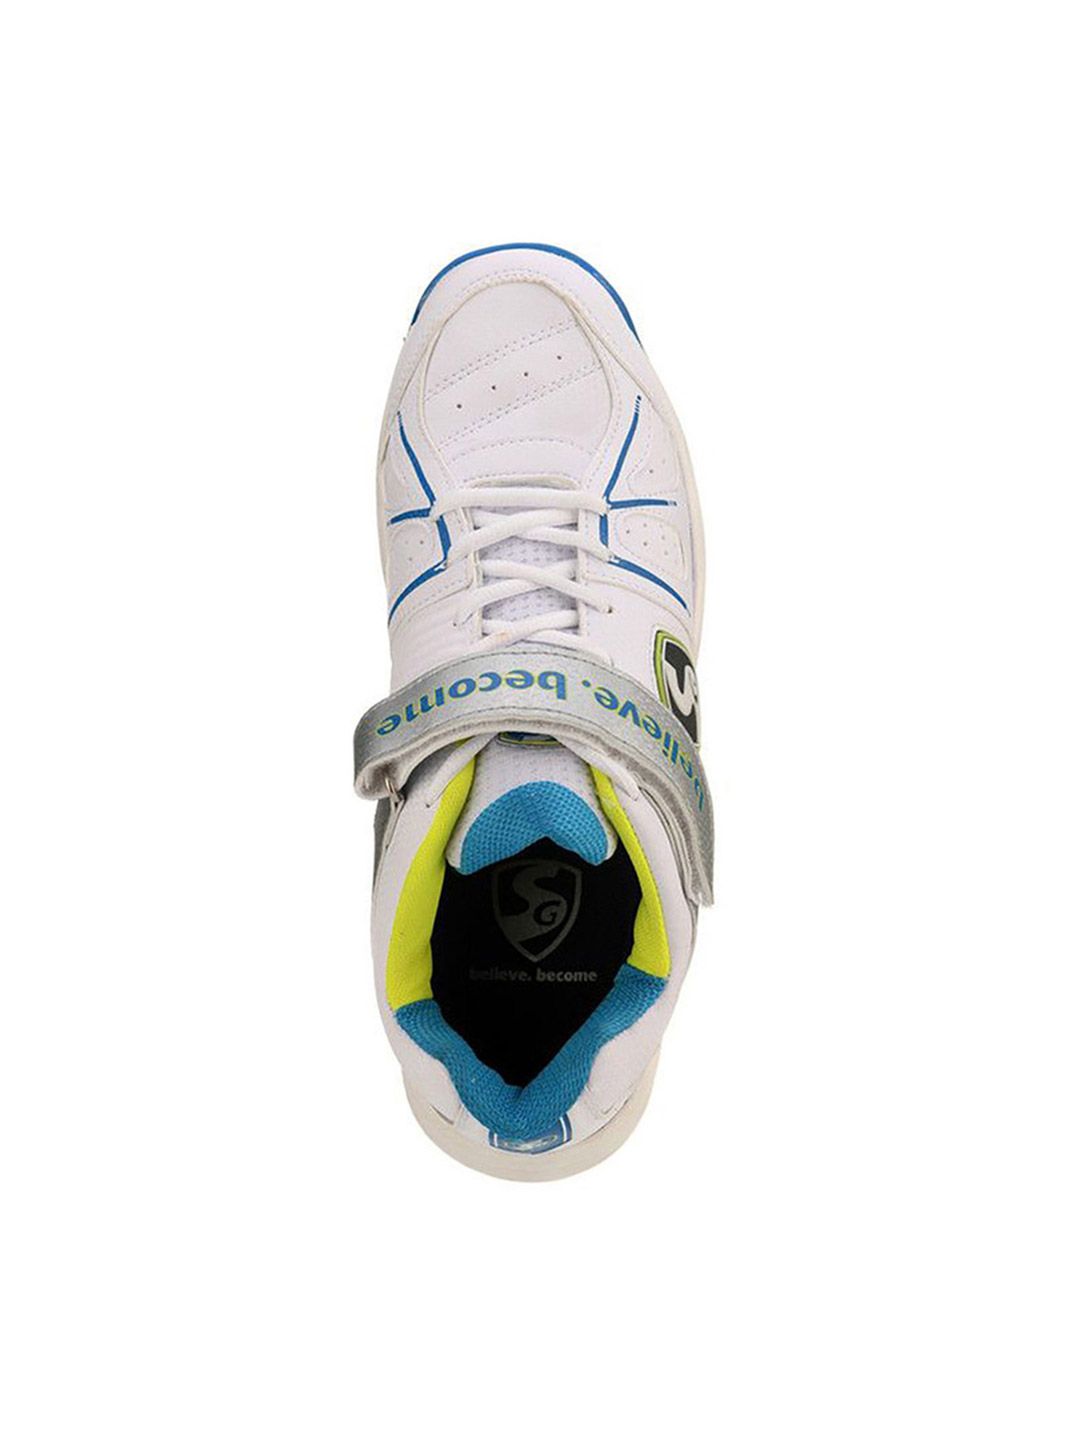 Buy SG White and Lime and Aqua Sports Shoes & SG Merchandise Online ...